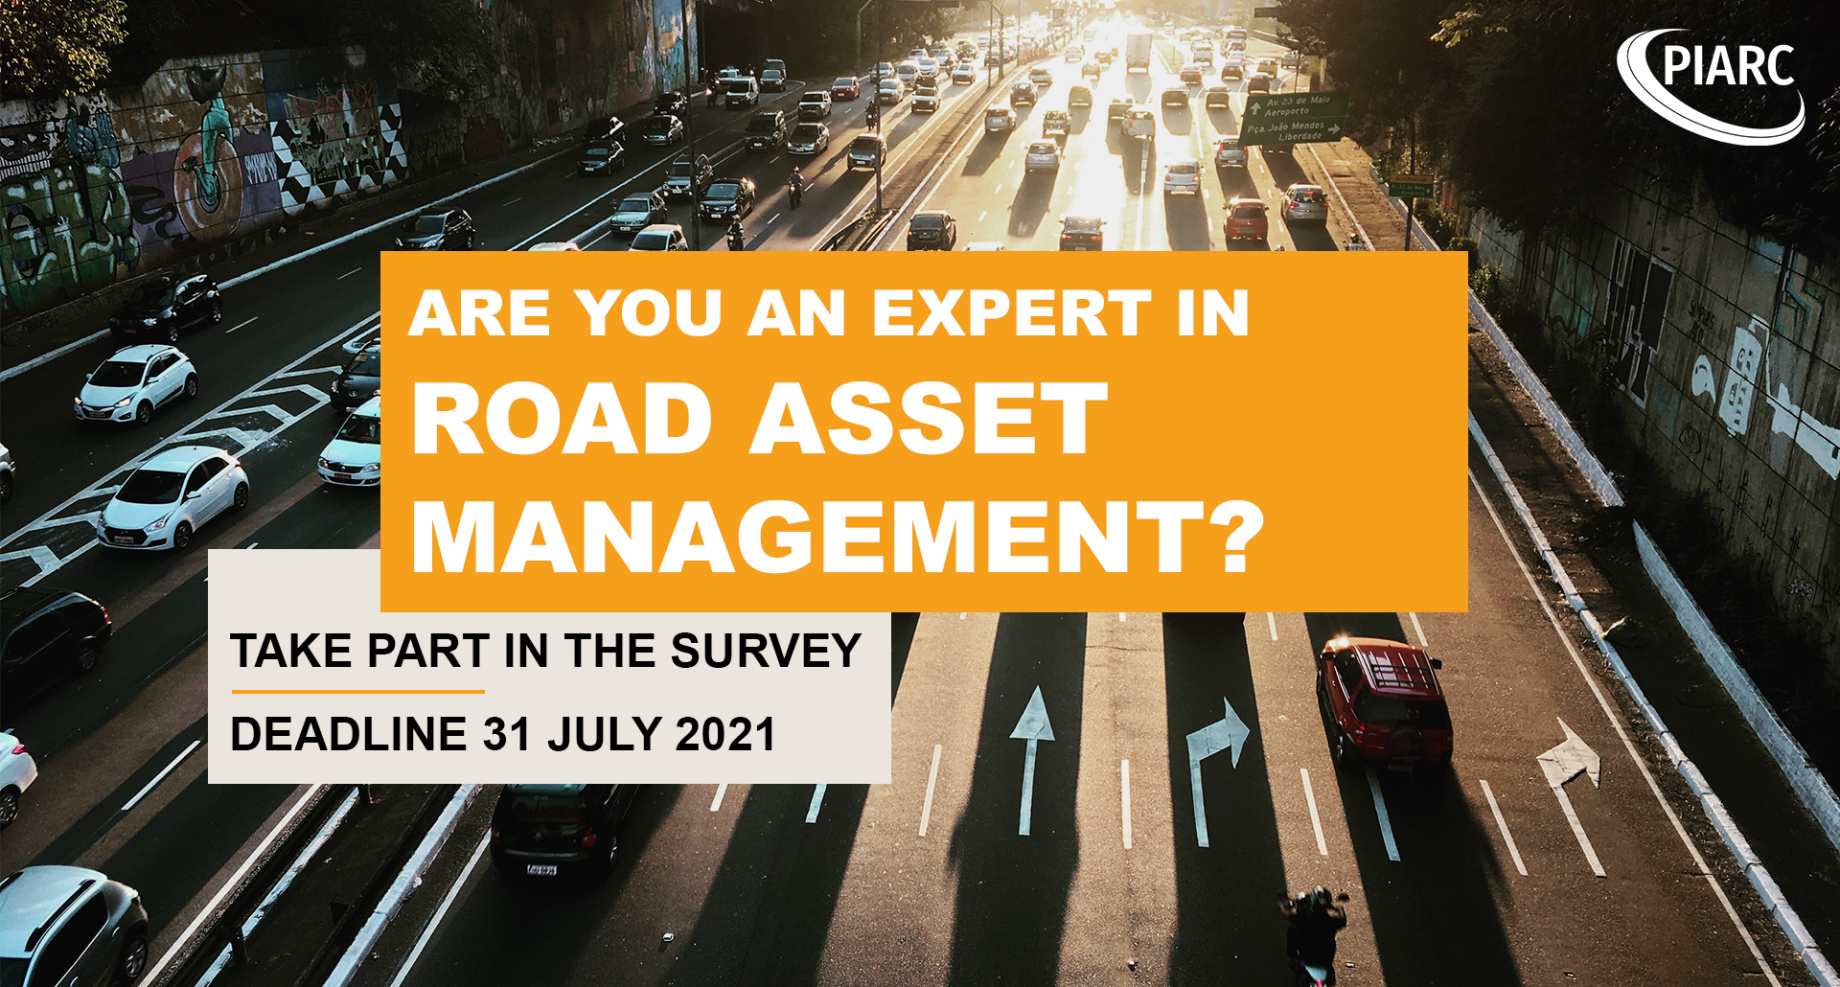 Share your knowledge about Asset Management in this new survey!